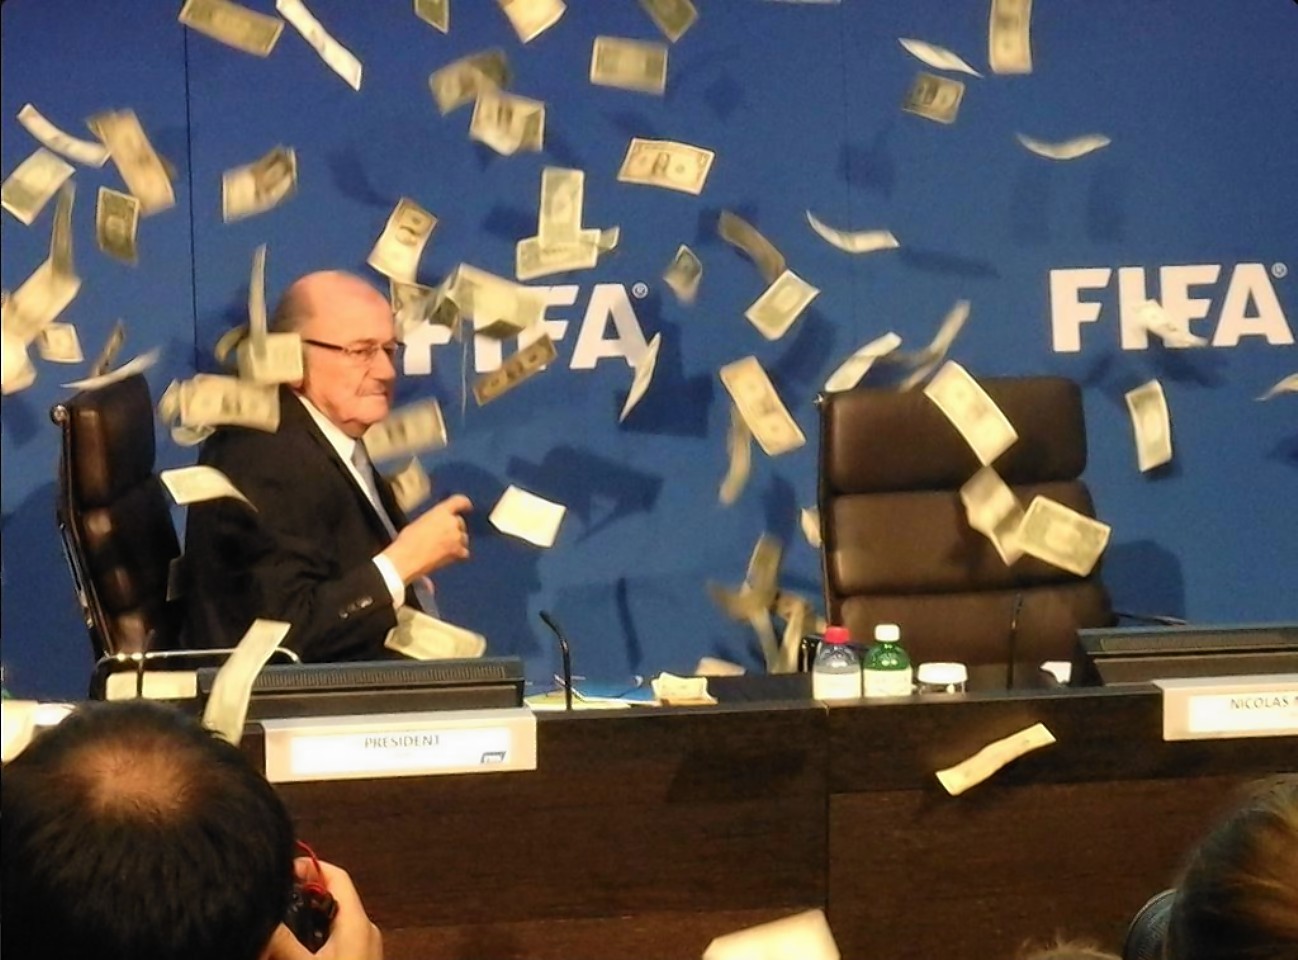 Blatter was covered in fake money